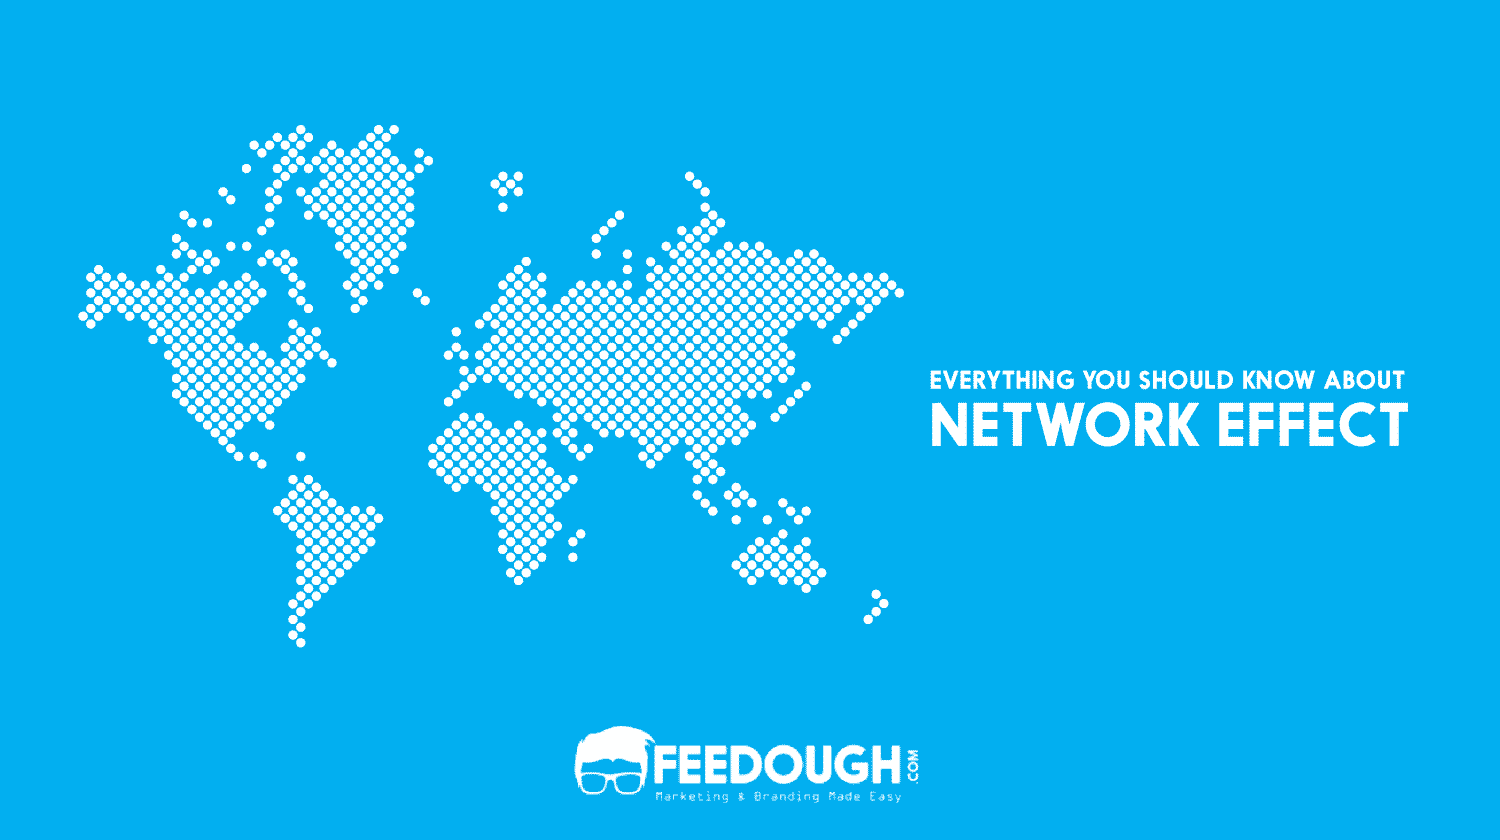 What Is Network Effect? Why Is It Valuable?